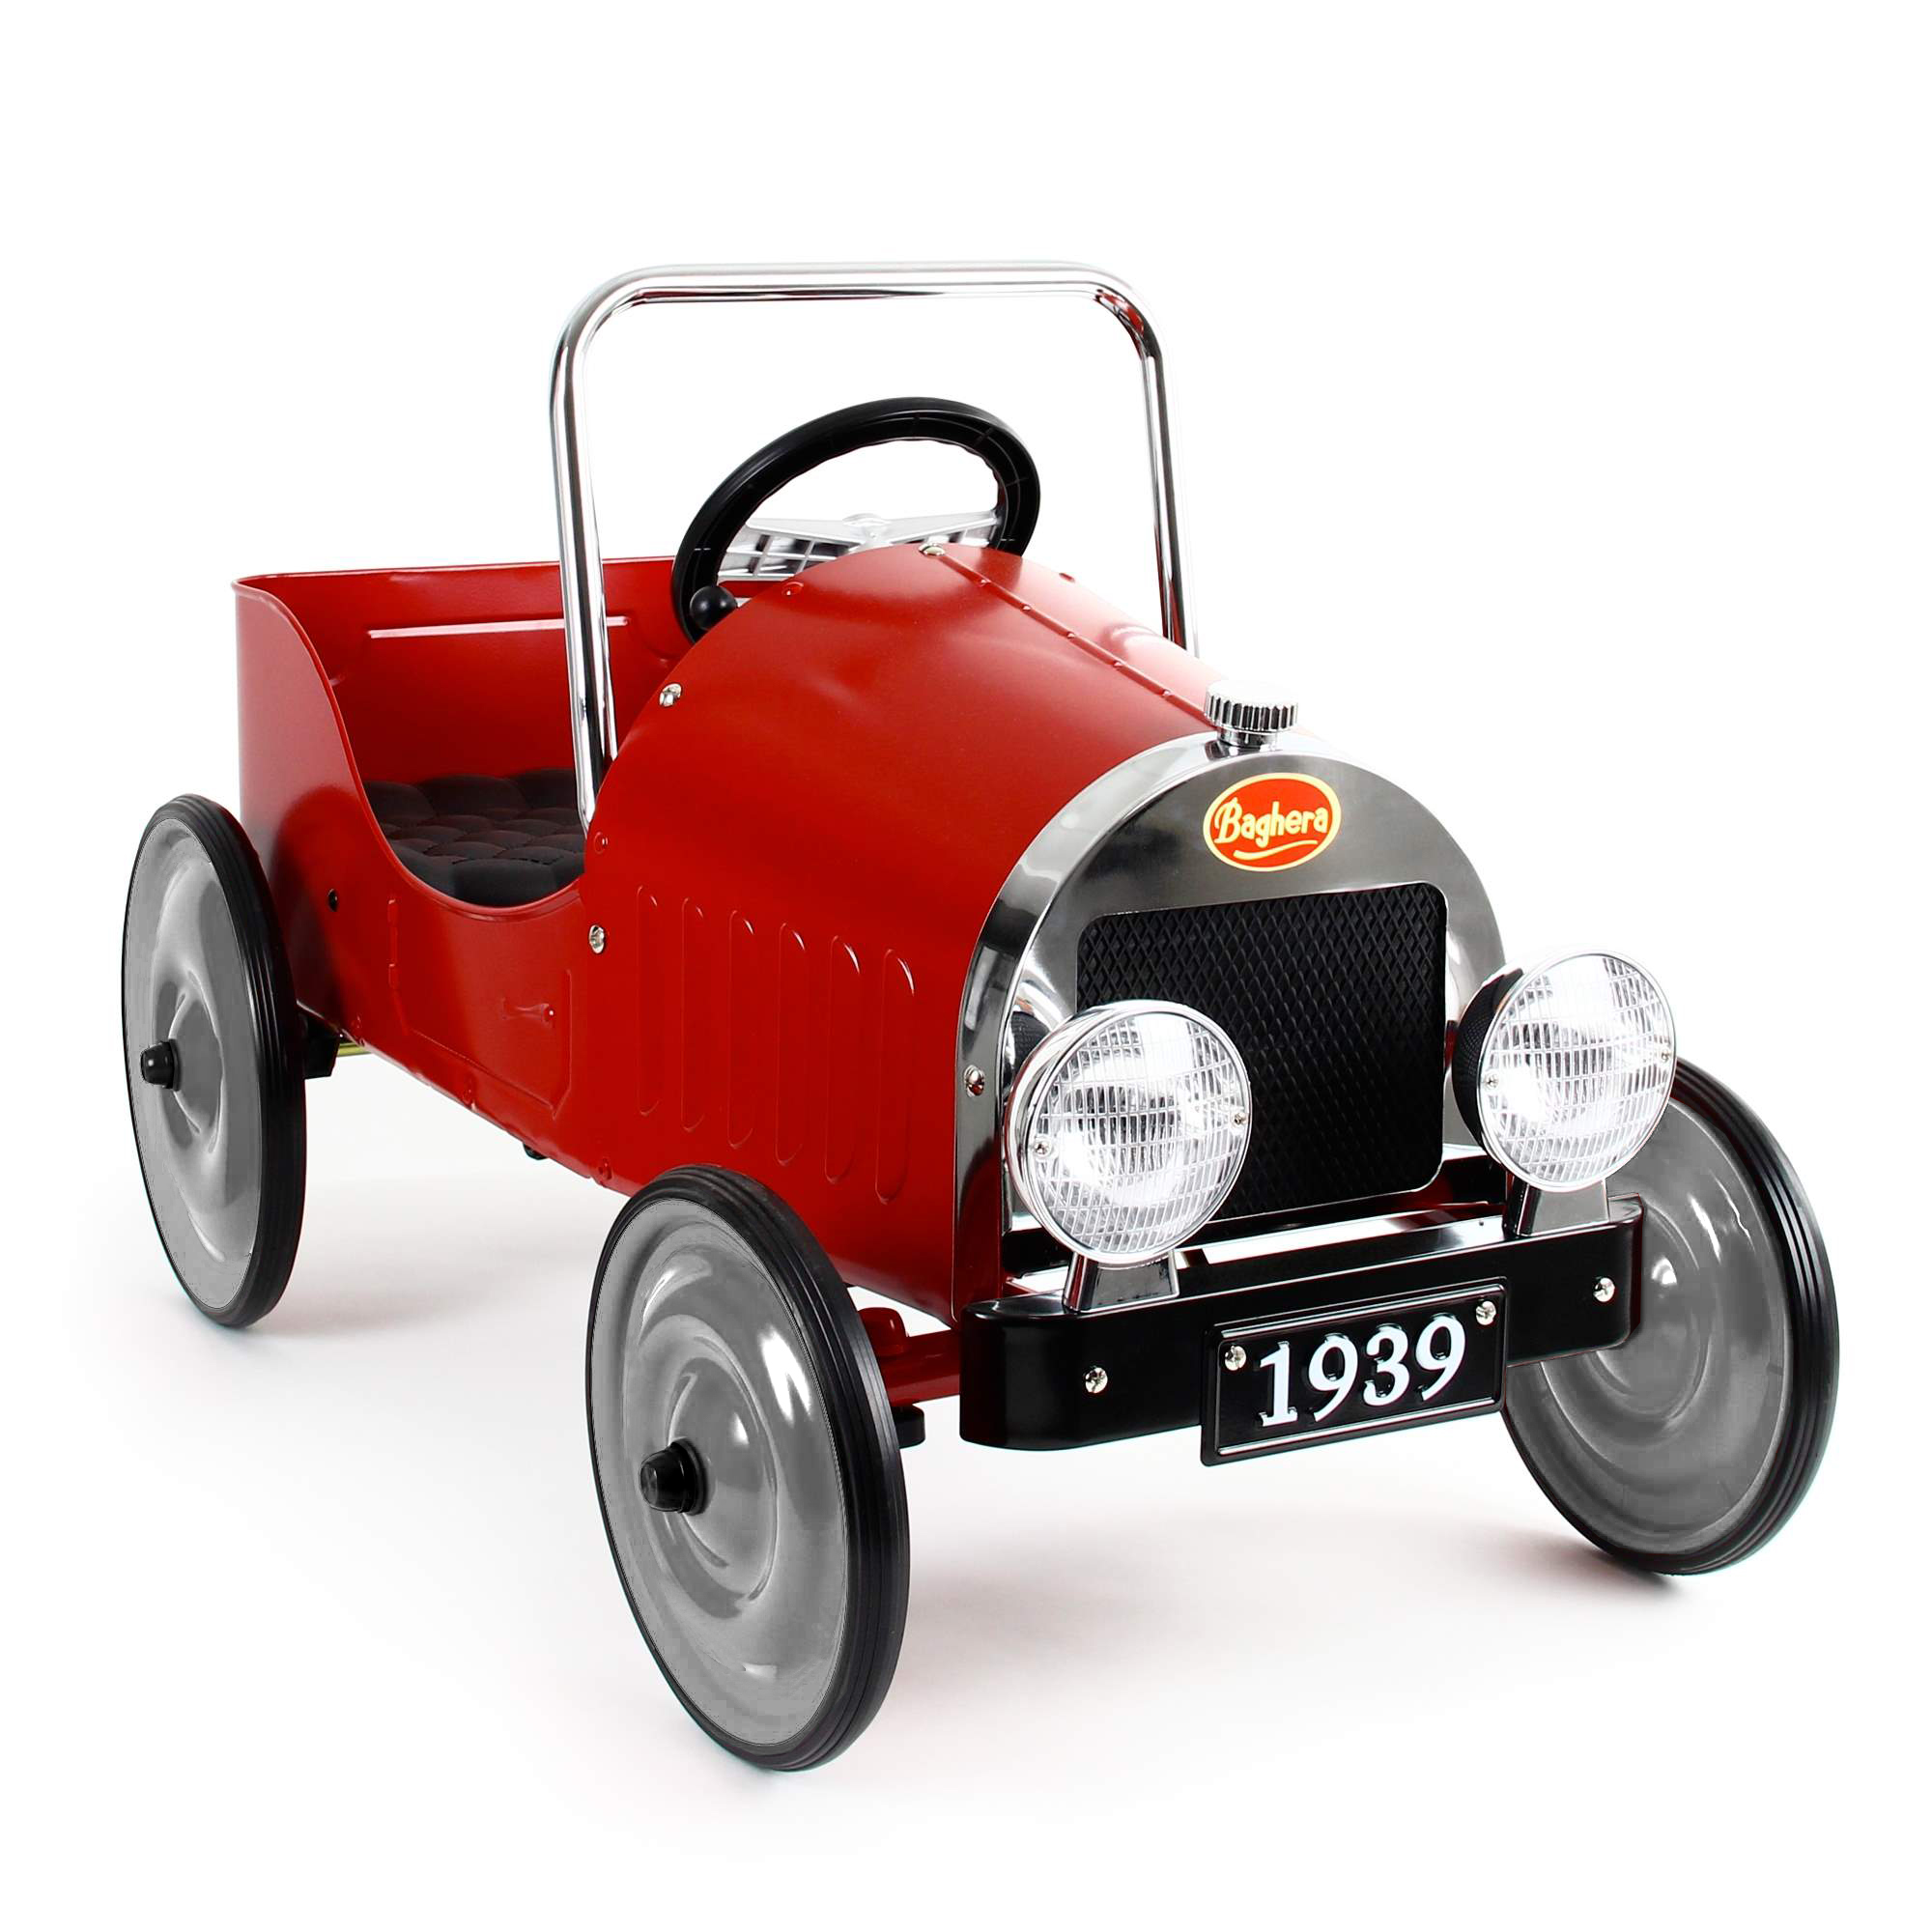 Pedal car RED